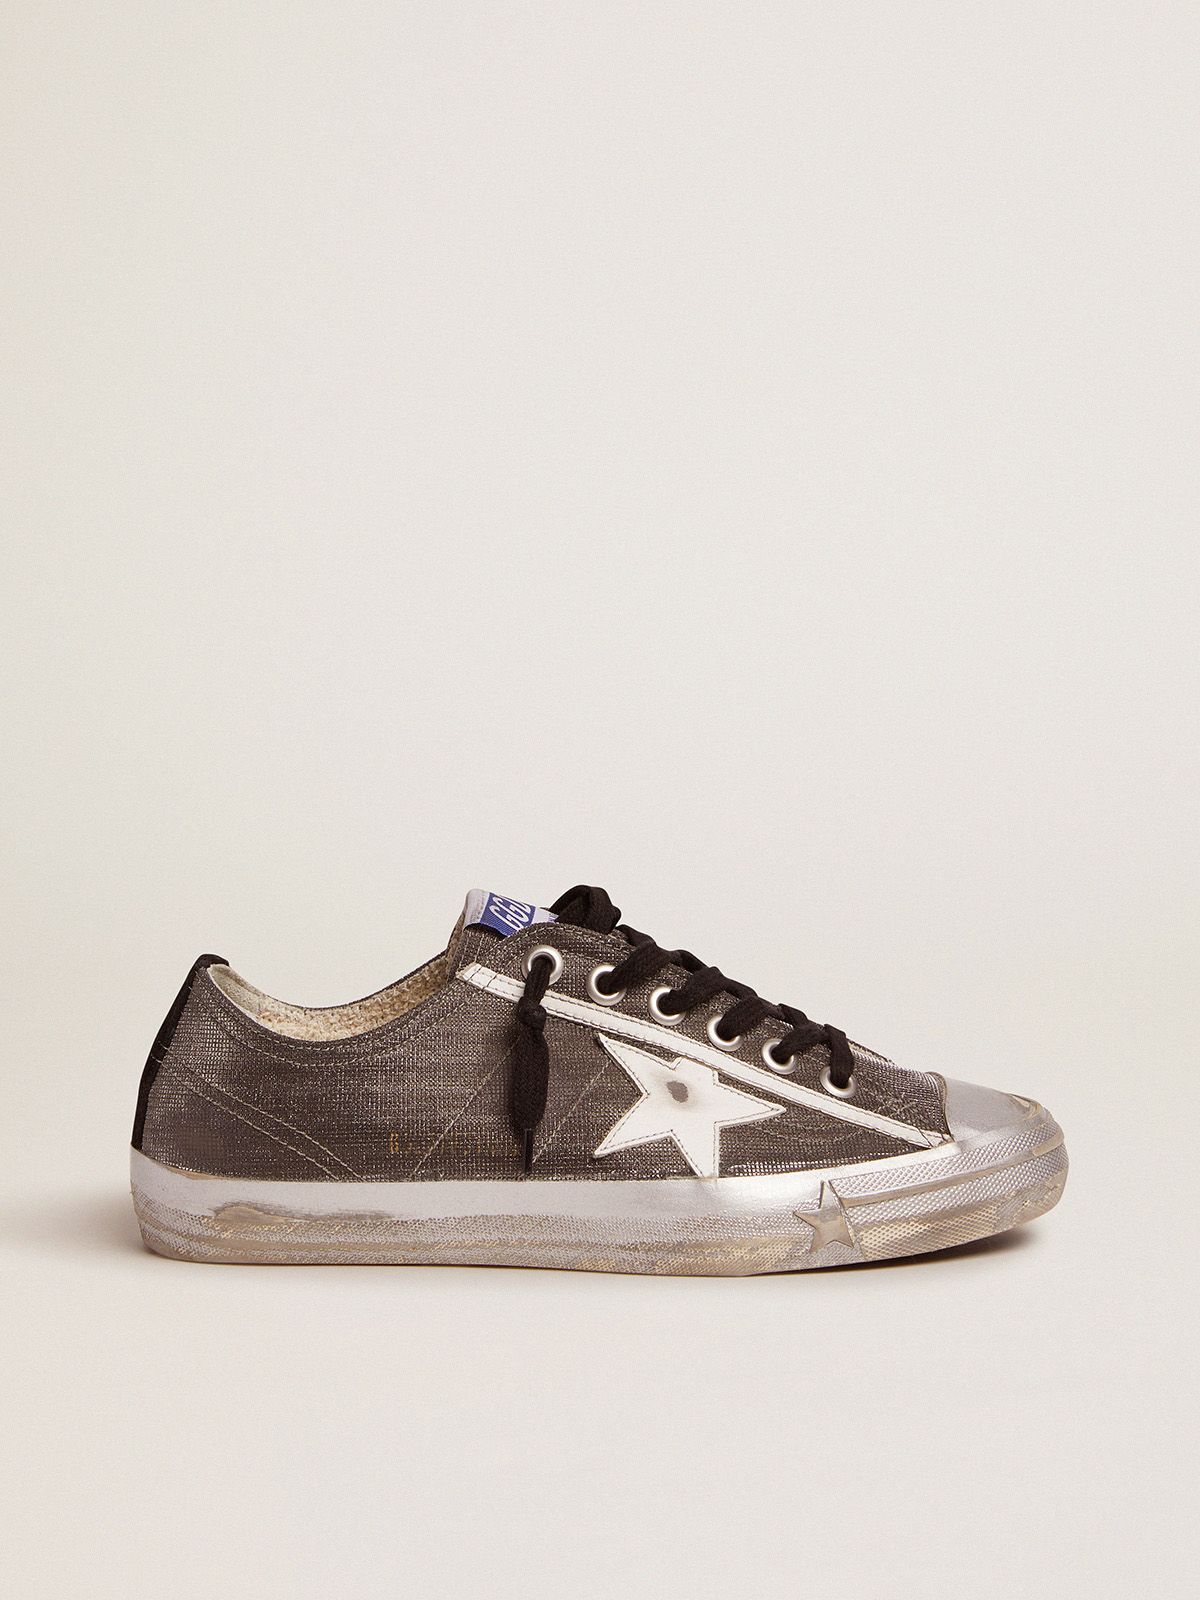 golden goose white gray V-Star checkered pattern Dark star sneakers with LTD and